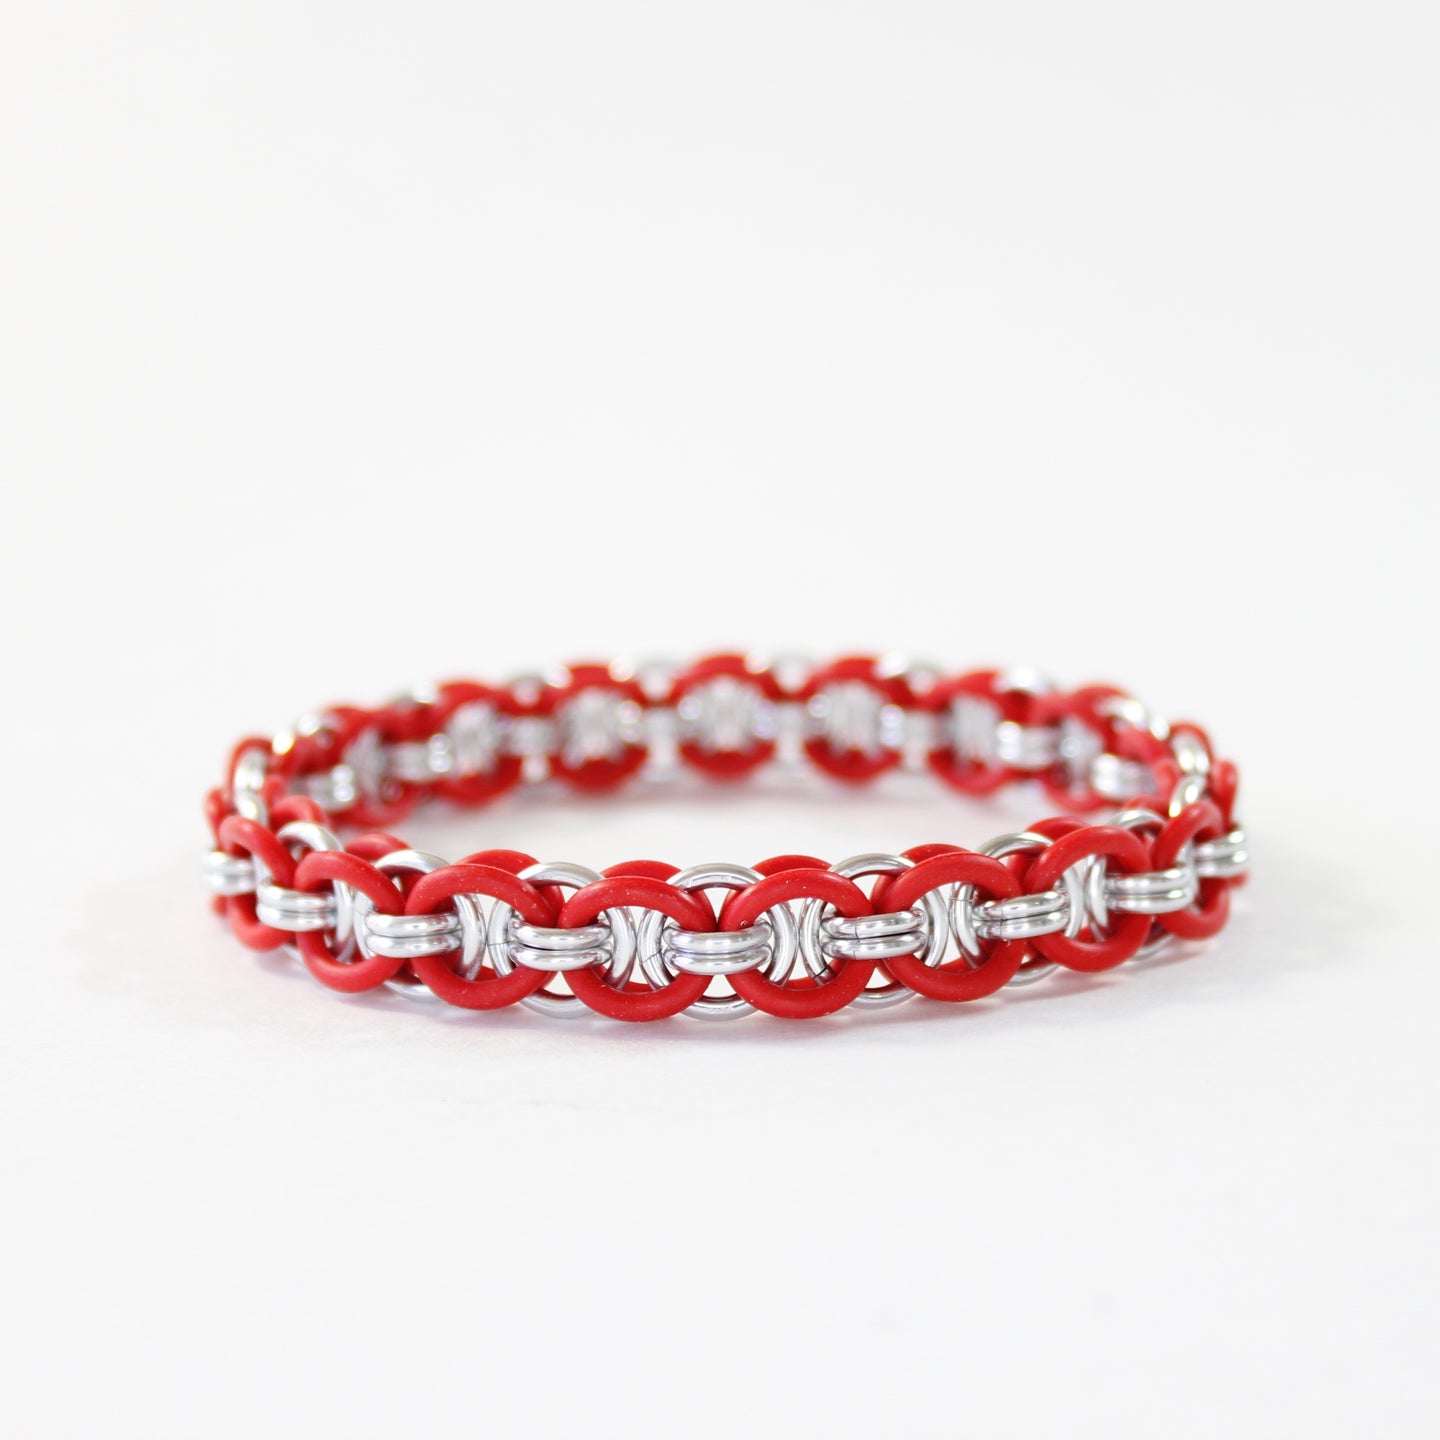 The Helm Stretch Bracelet in Red + Silver